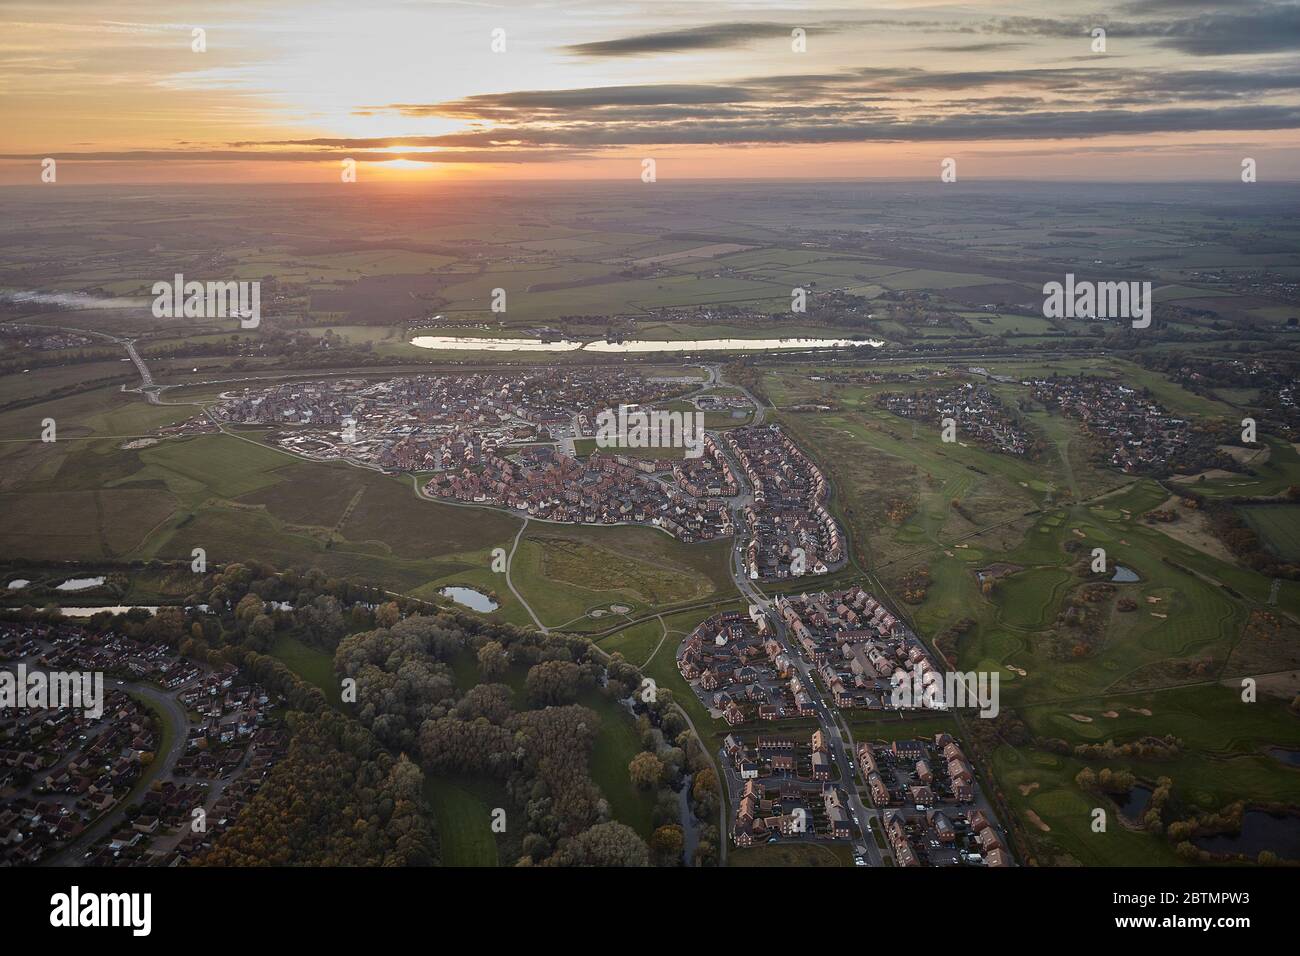 Aerial View of a Sunset over English Countryside Stock Photo